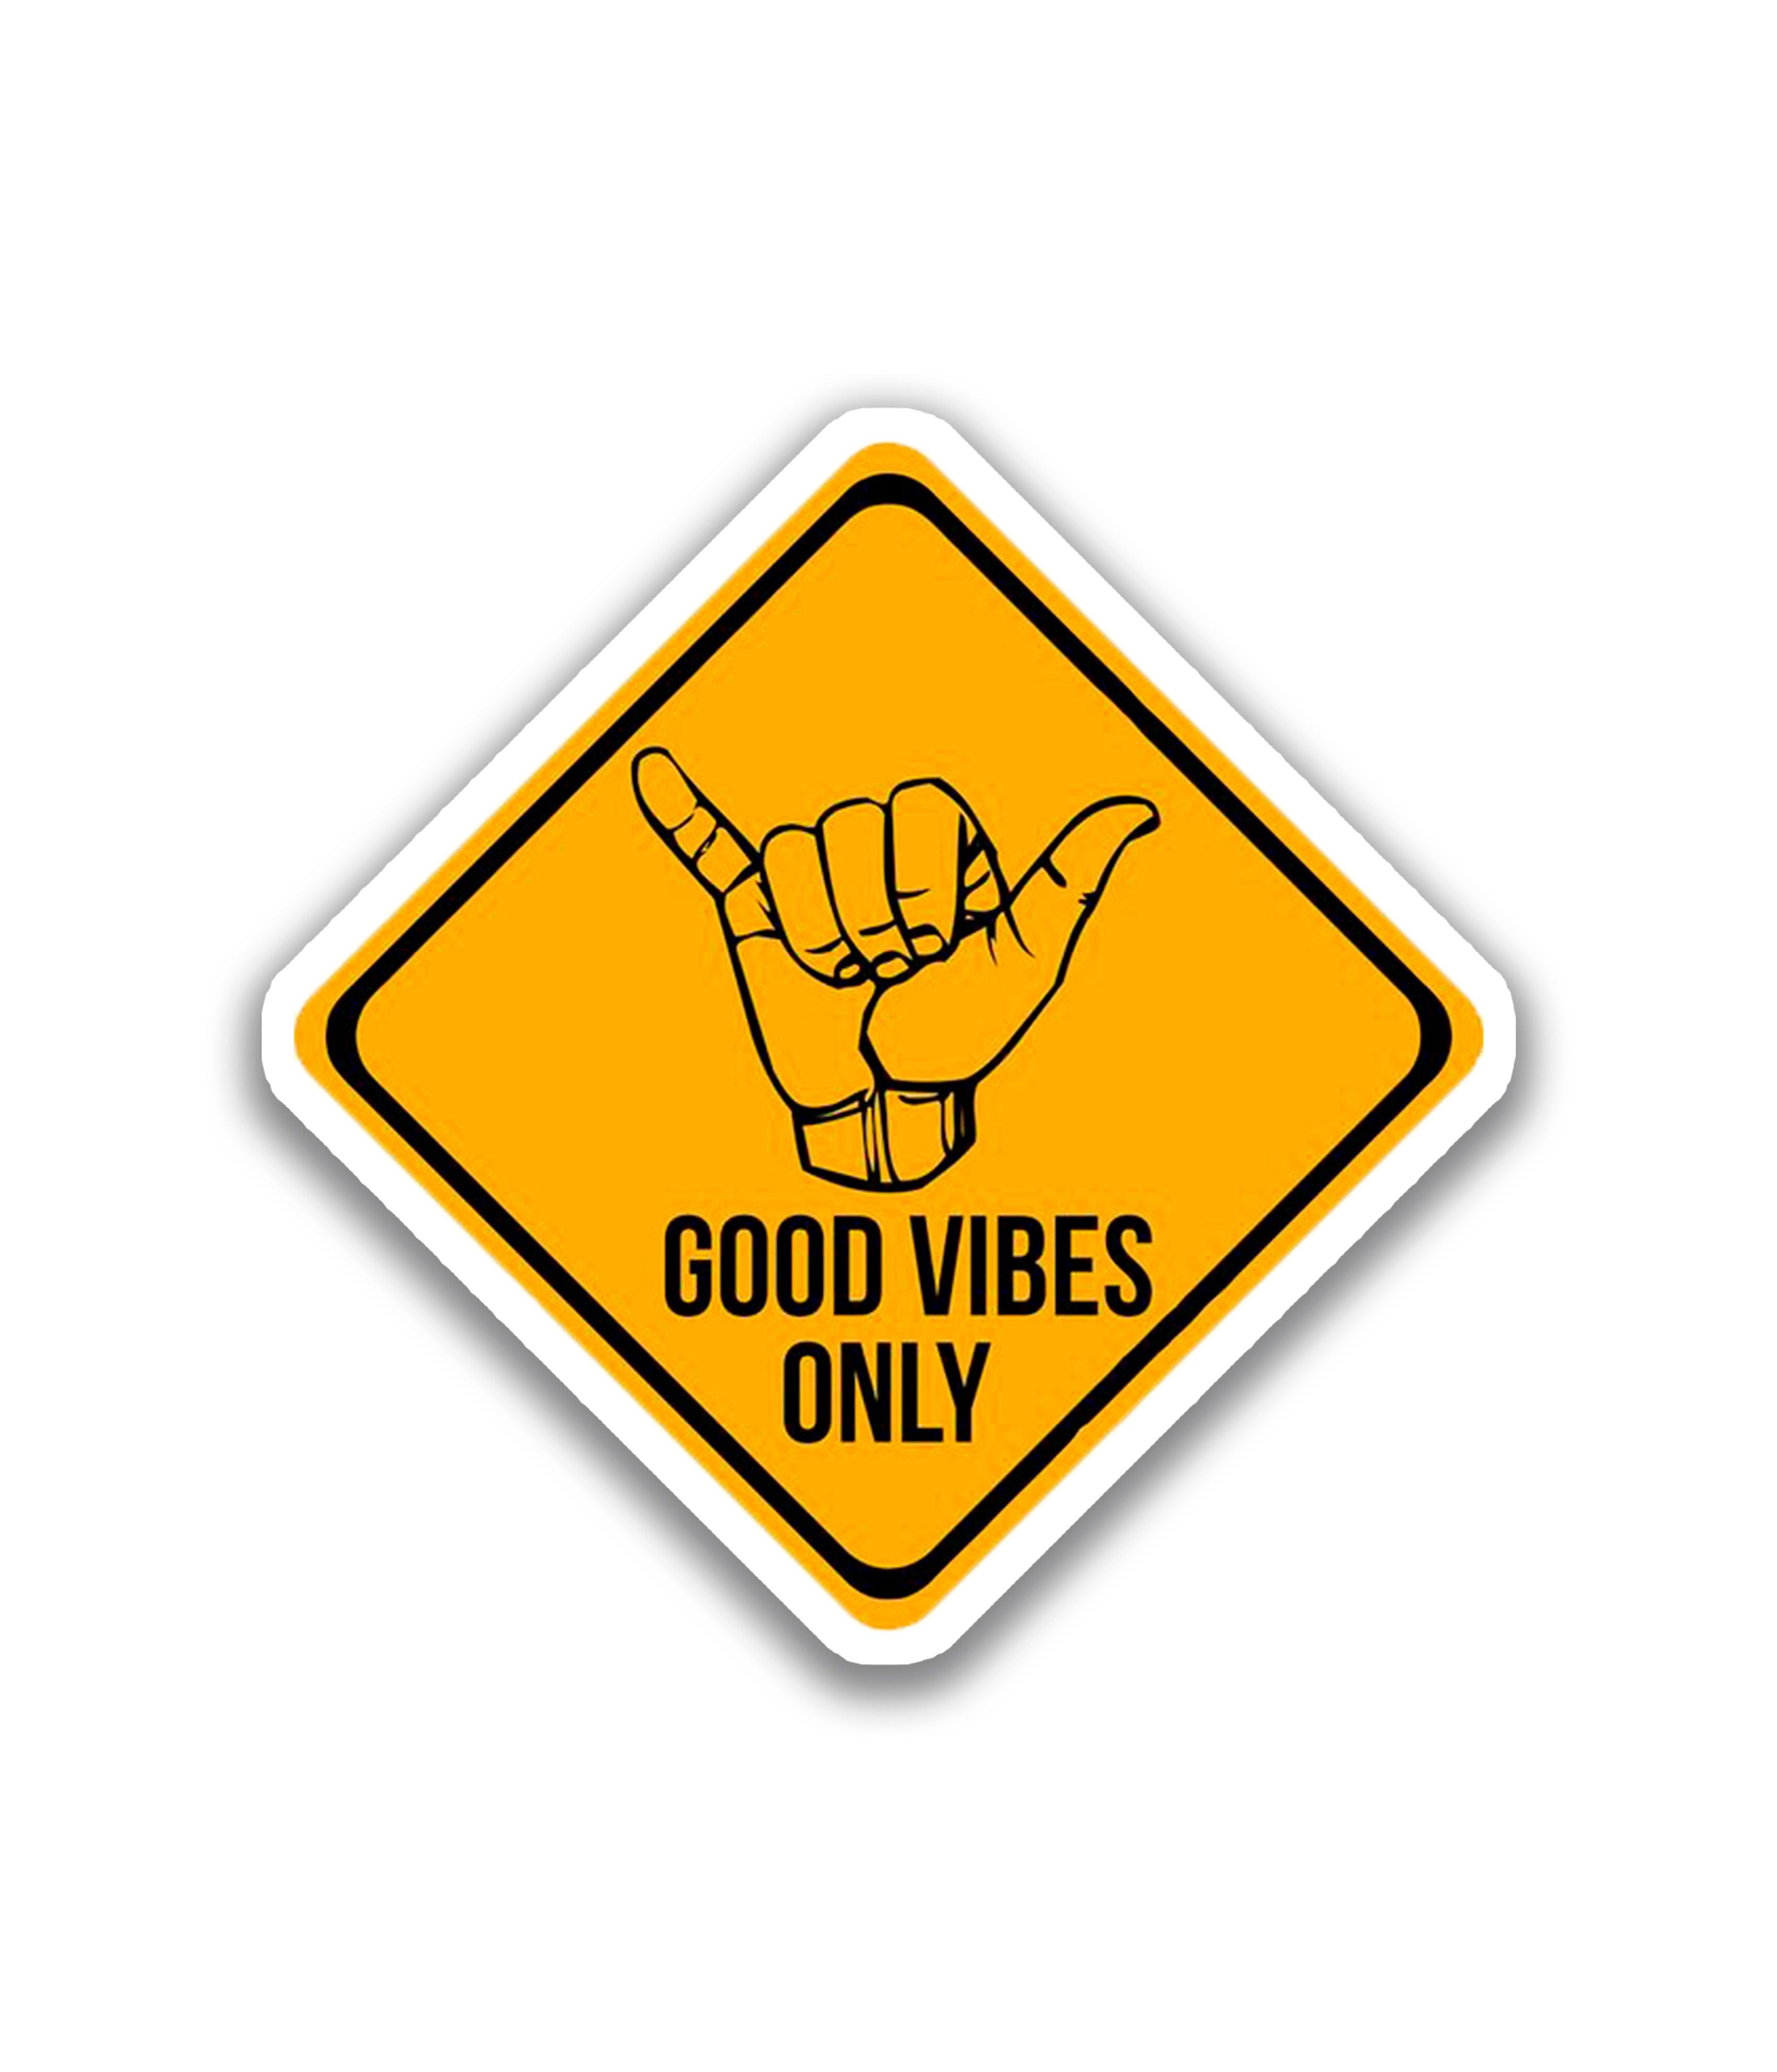 Good vibes only - Rei do Sticker